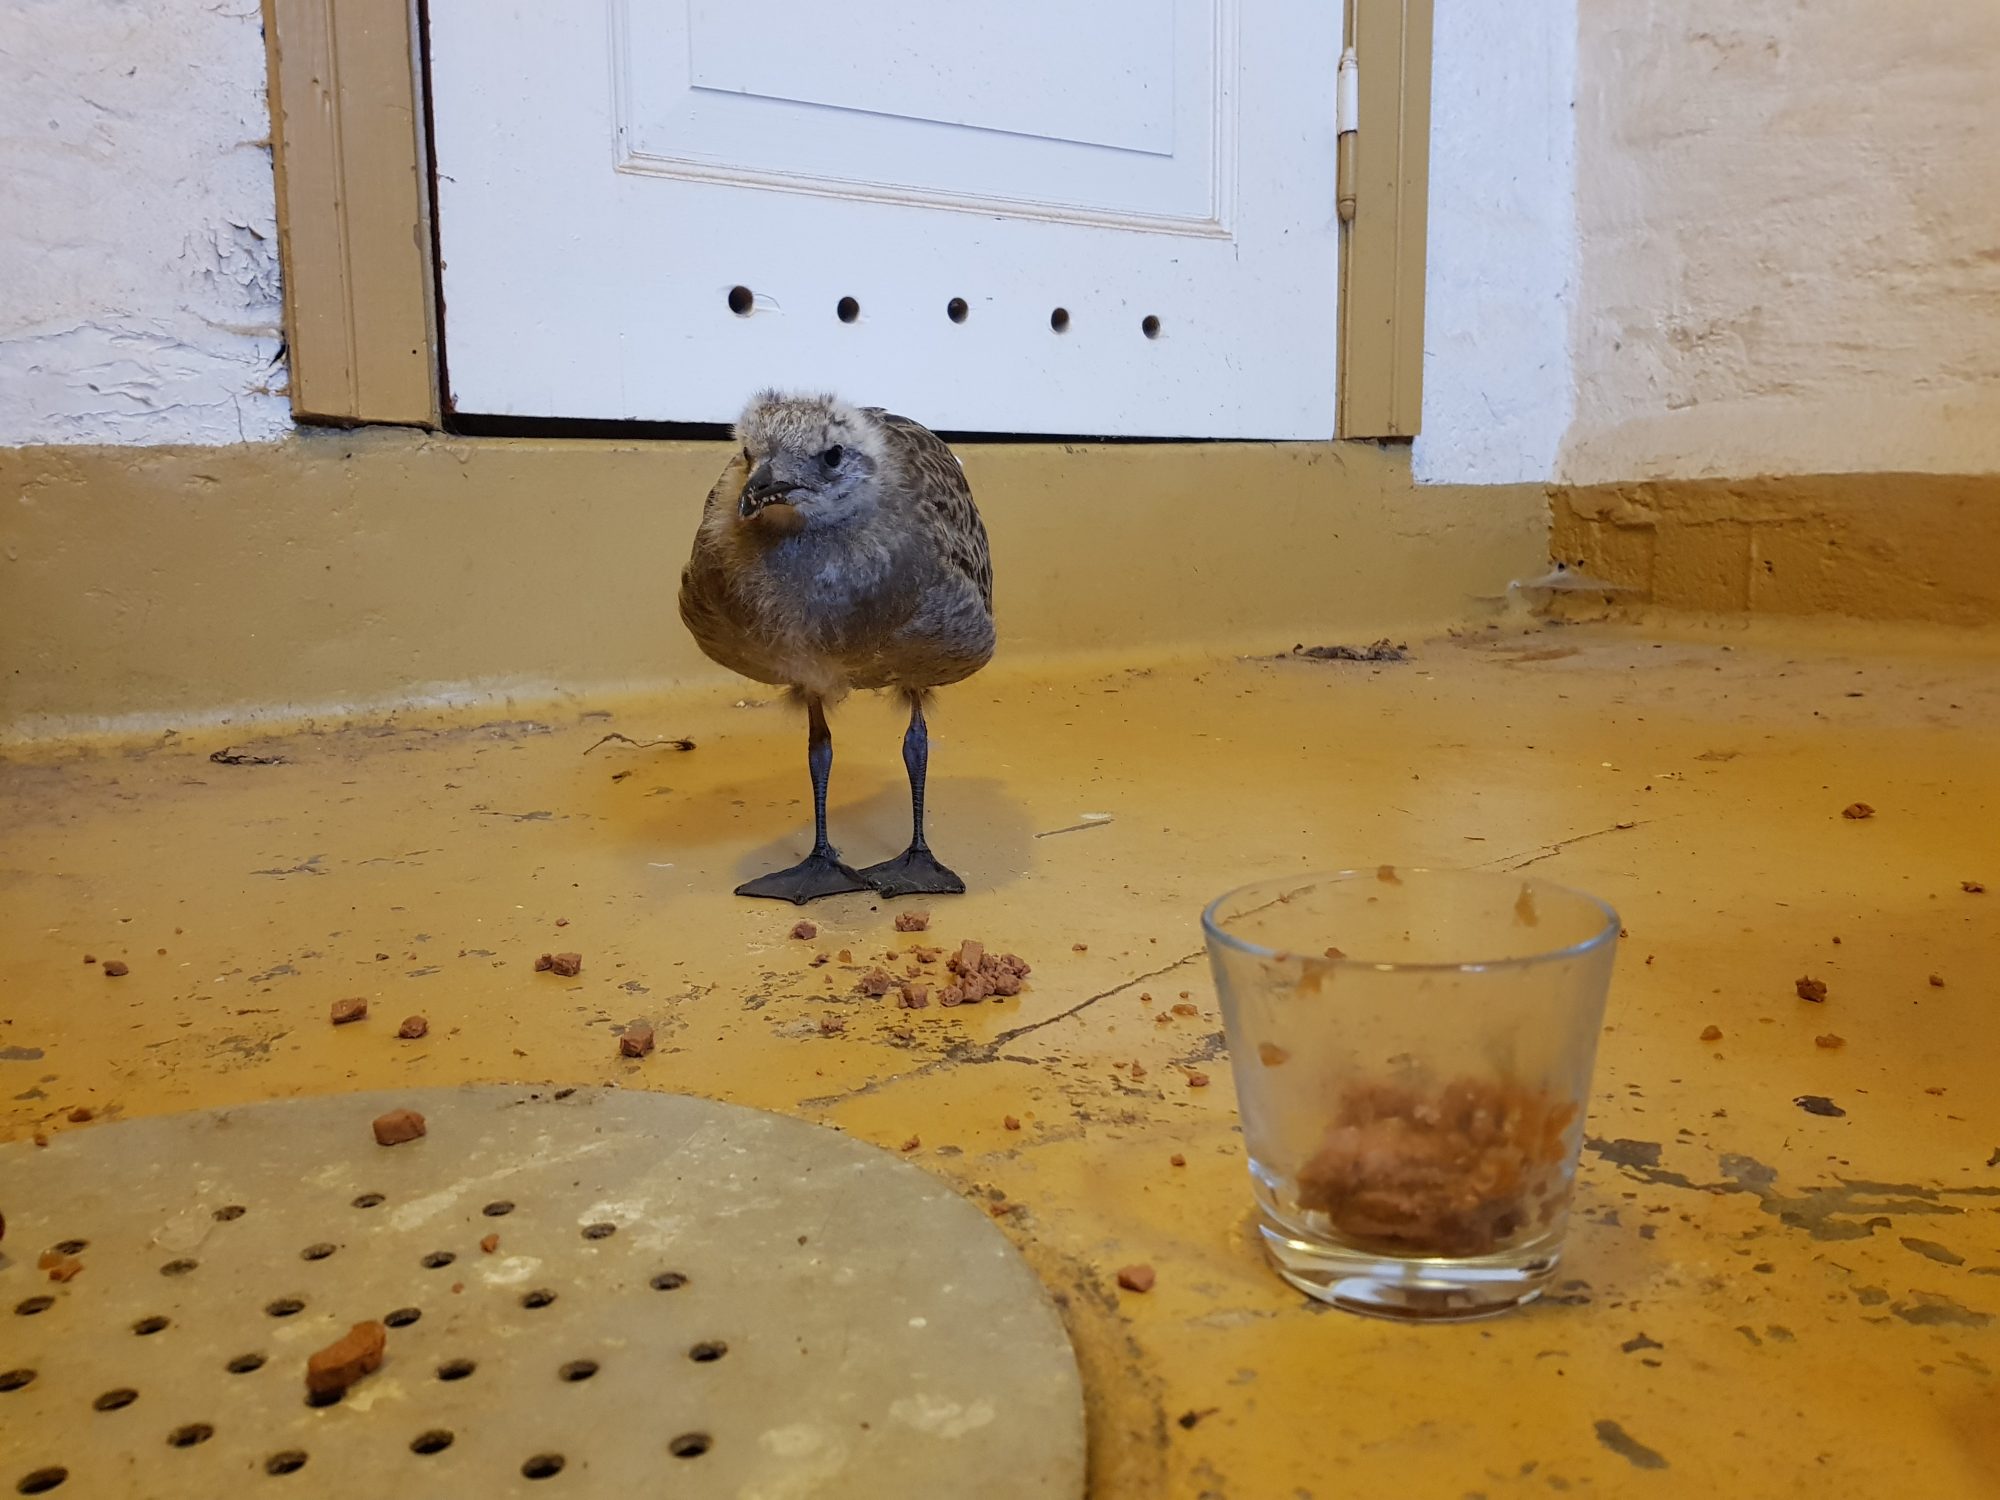 A baby seagull stood in the basement of a house